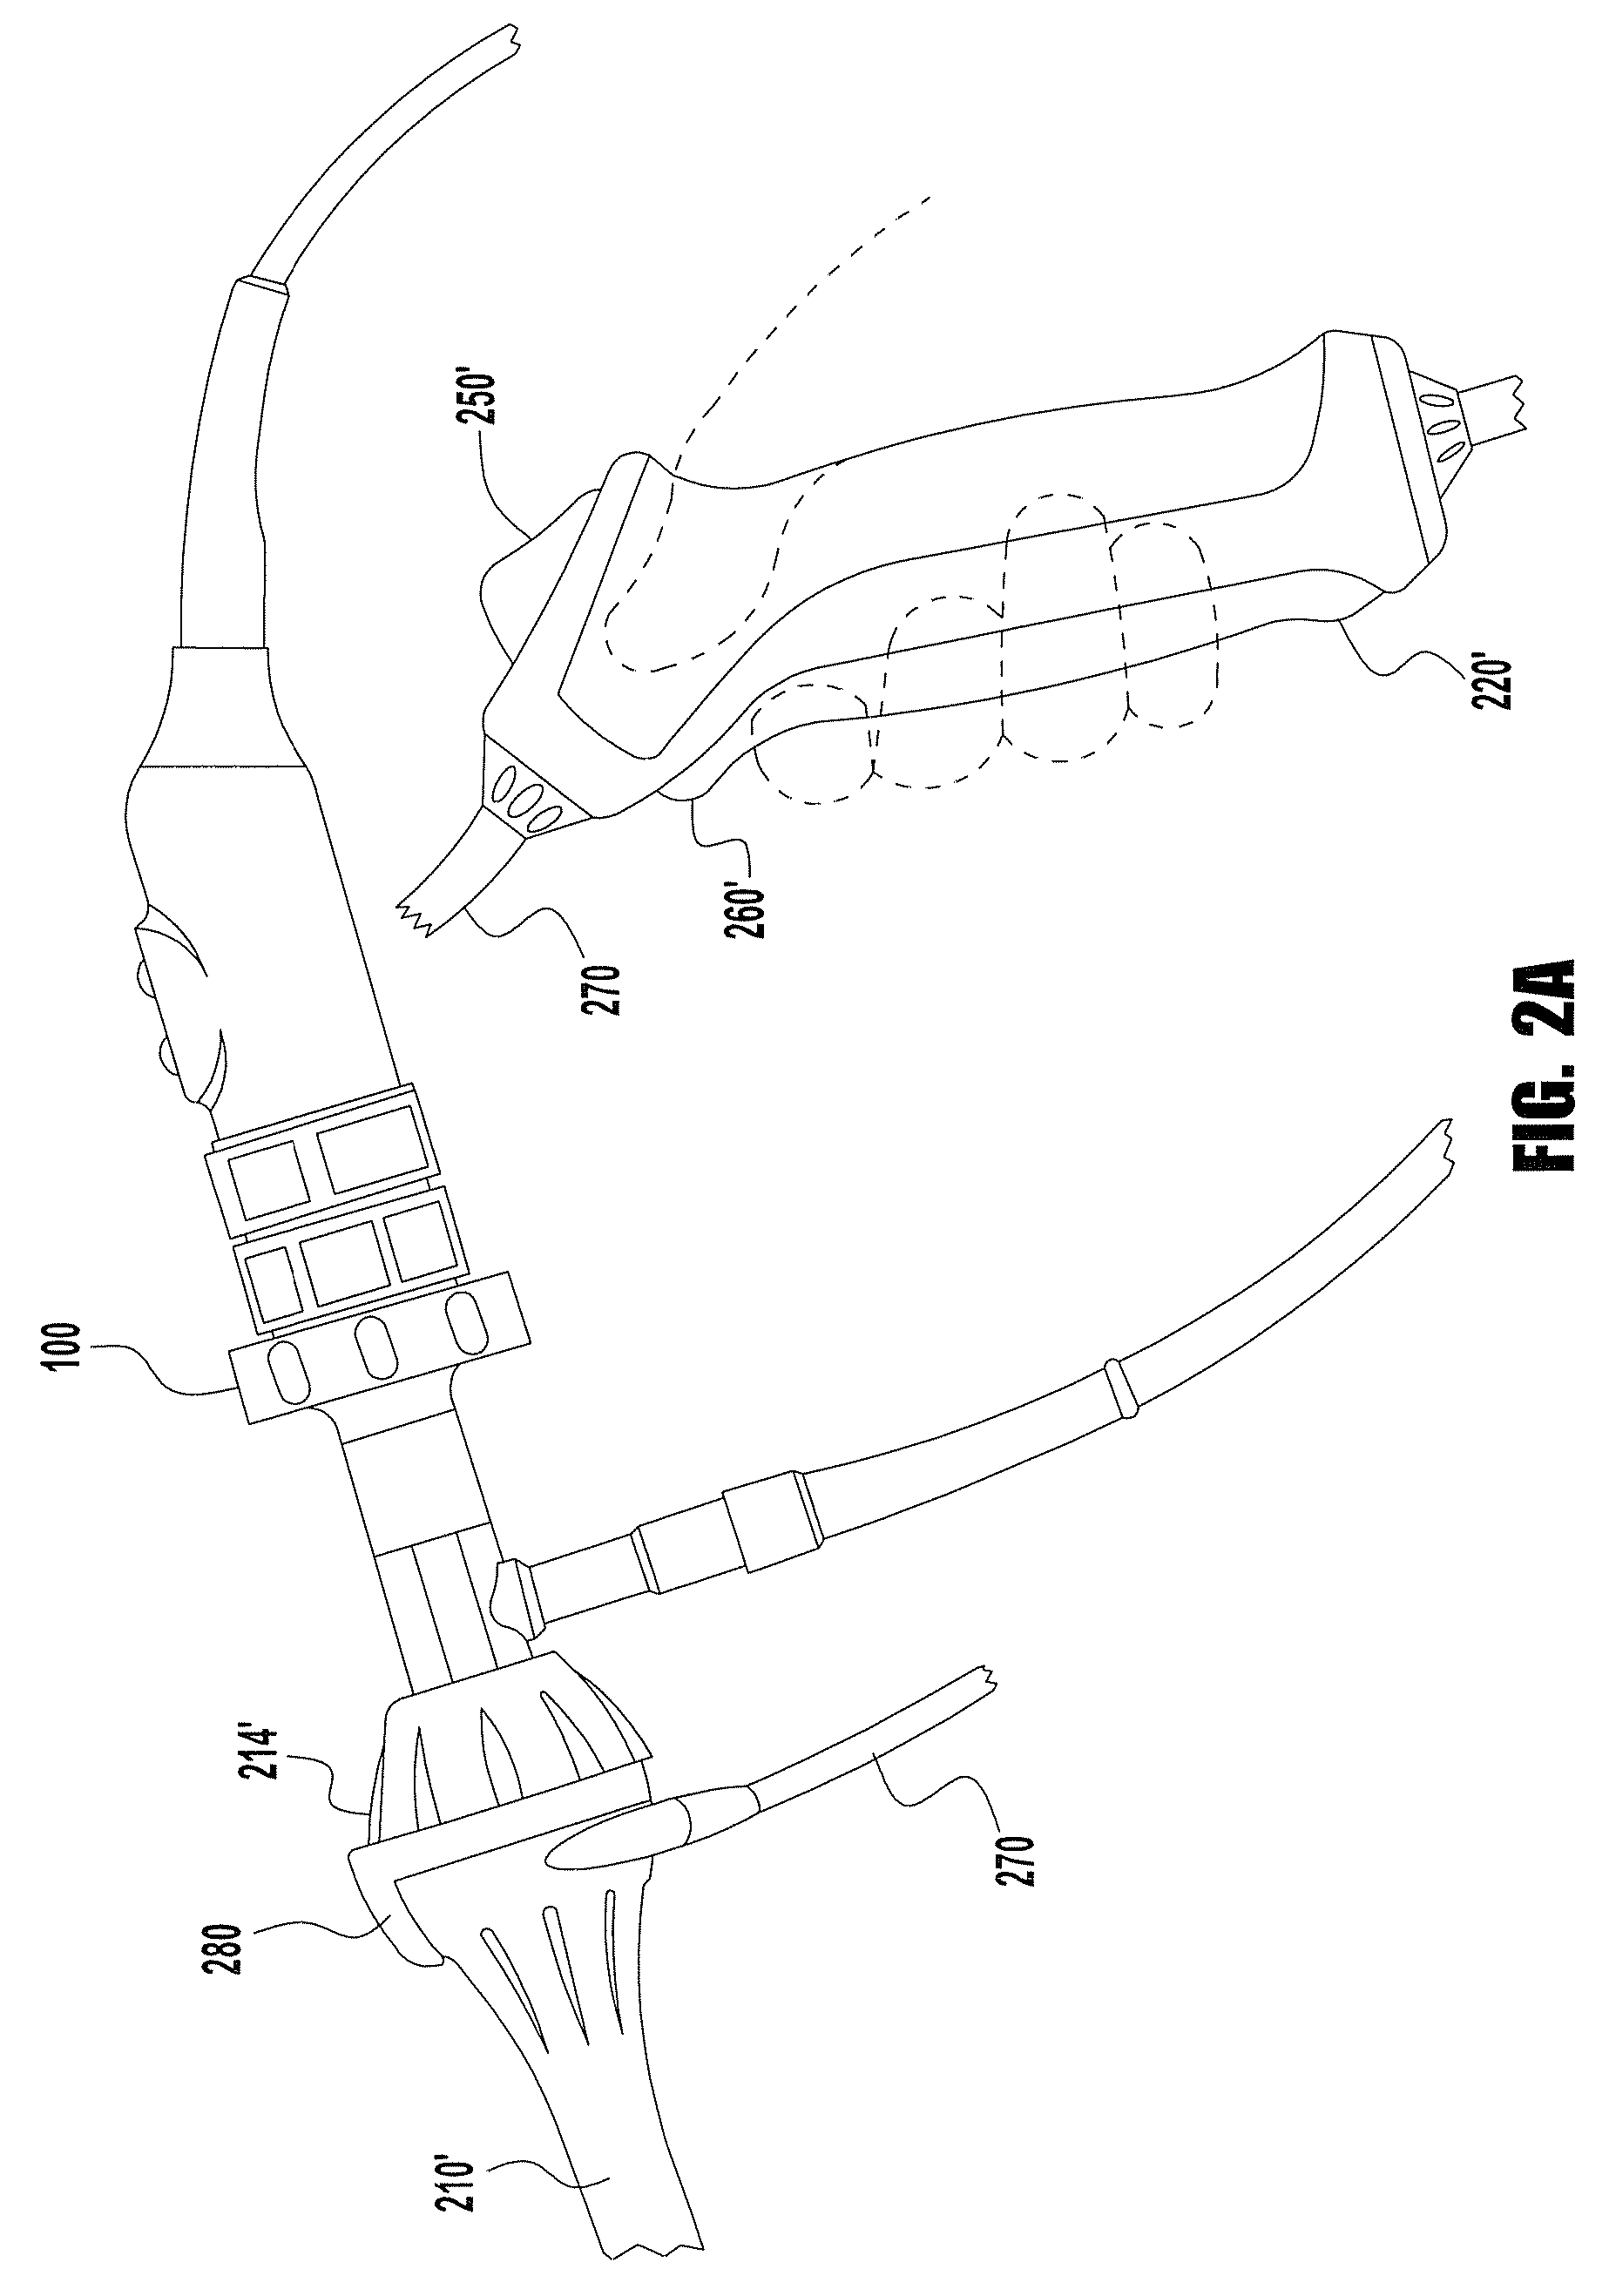 Device for maintaining visualization with surgical scopes